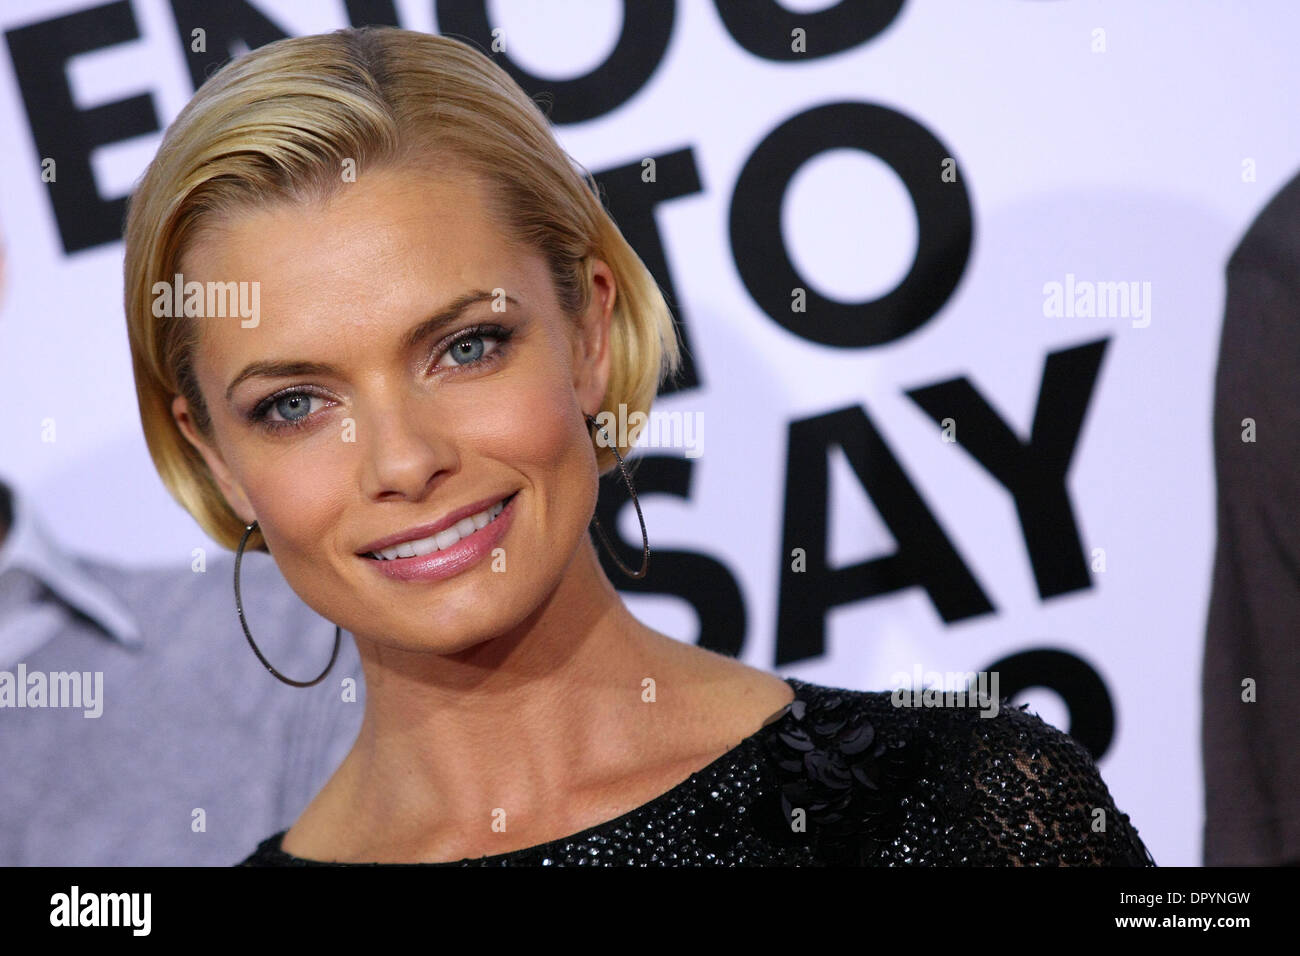 Mar 17, 2009 - Westwood, California, USA - Actress JAIME PRESSLY arriving to 'I Love You, Man' Los Angeles Premiere held at the Mann Village Theatre. (Credit Image: © Lisa O'Connor/ZUMA Press) Stock Photo